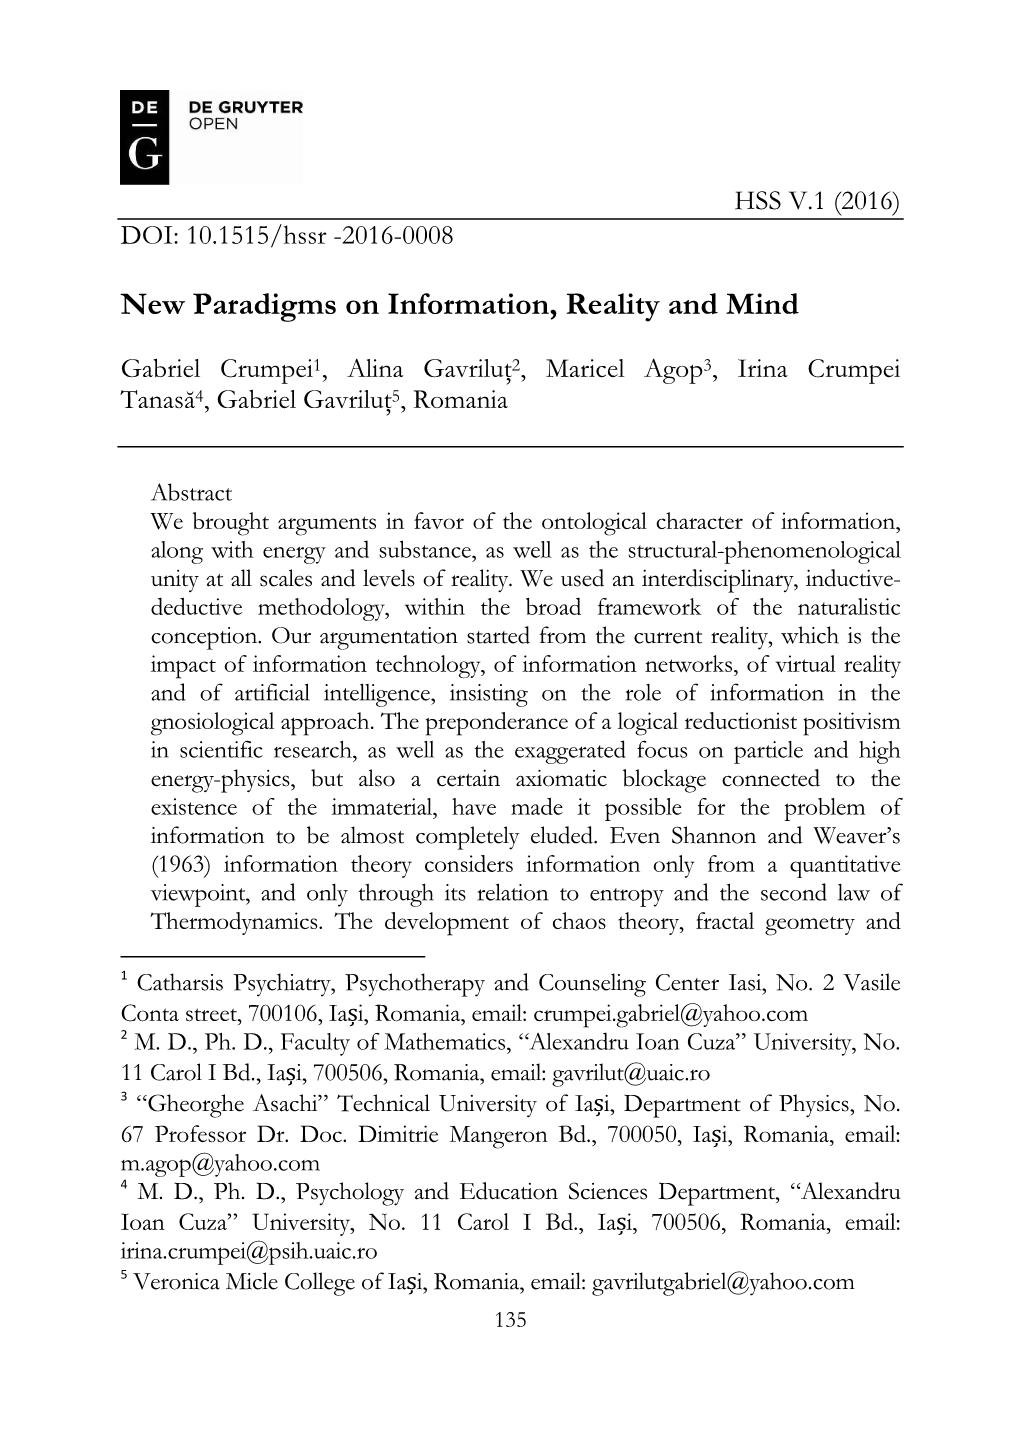 New Paradigms on Information, Reality and Mind